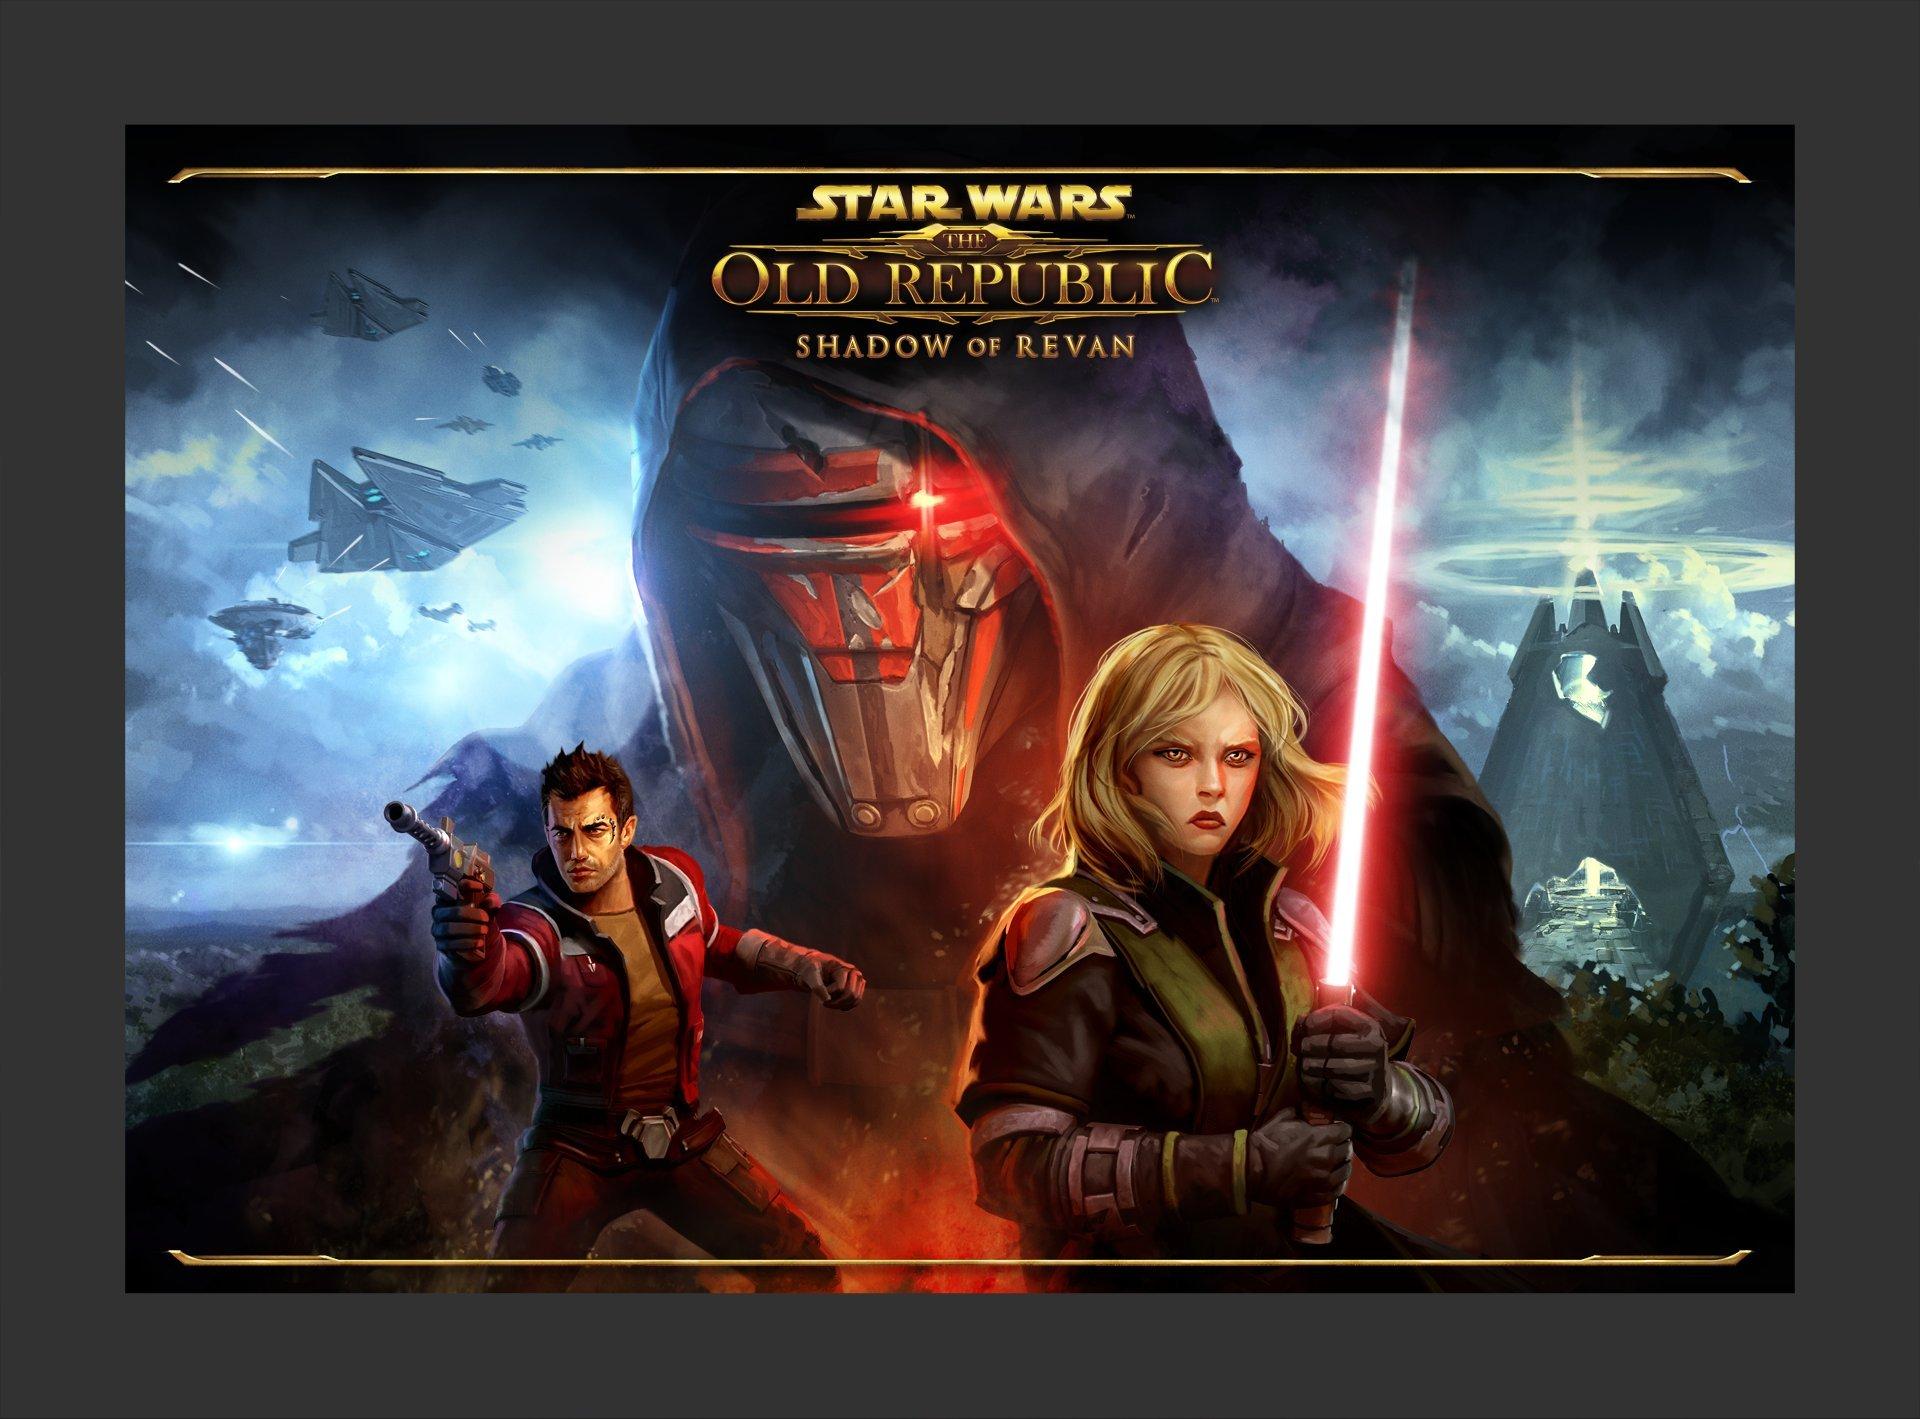 Star Wars: The Old Republic Shadow of Revan DLC - PC